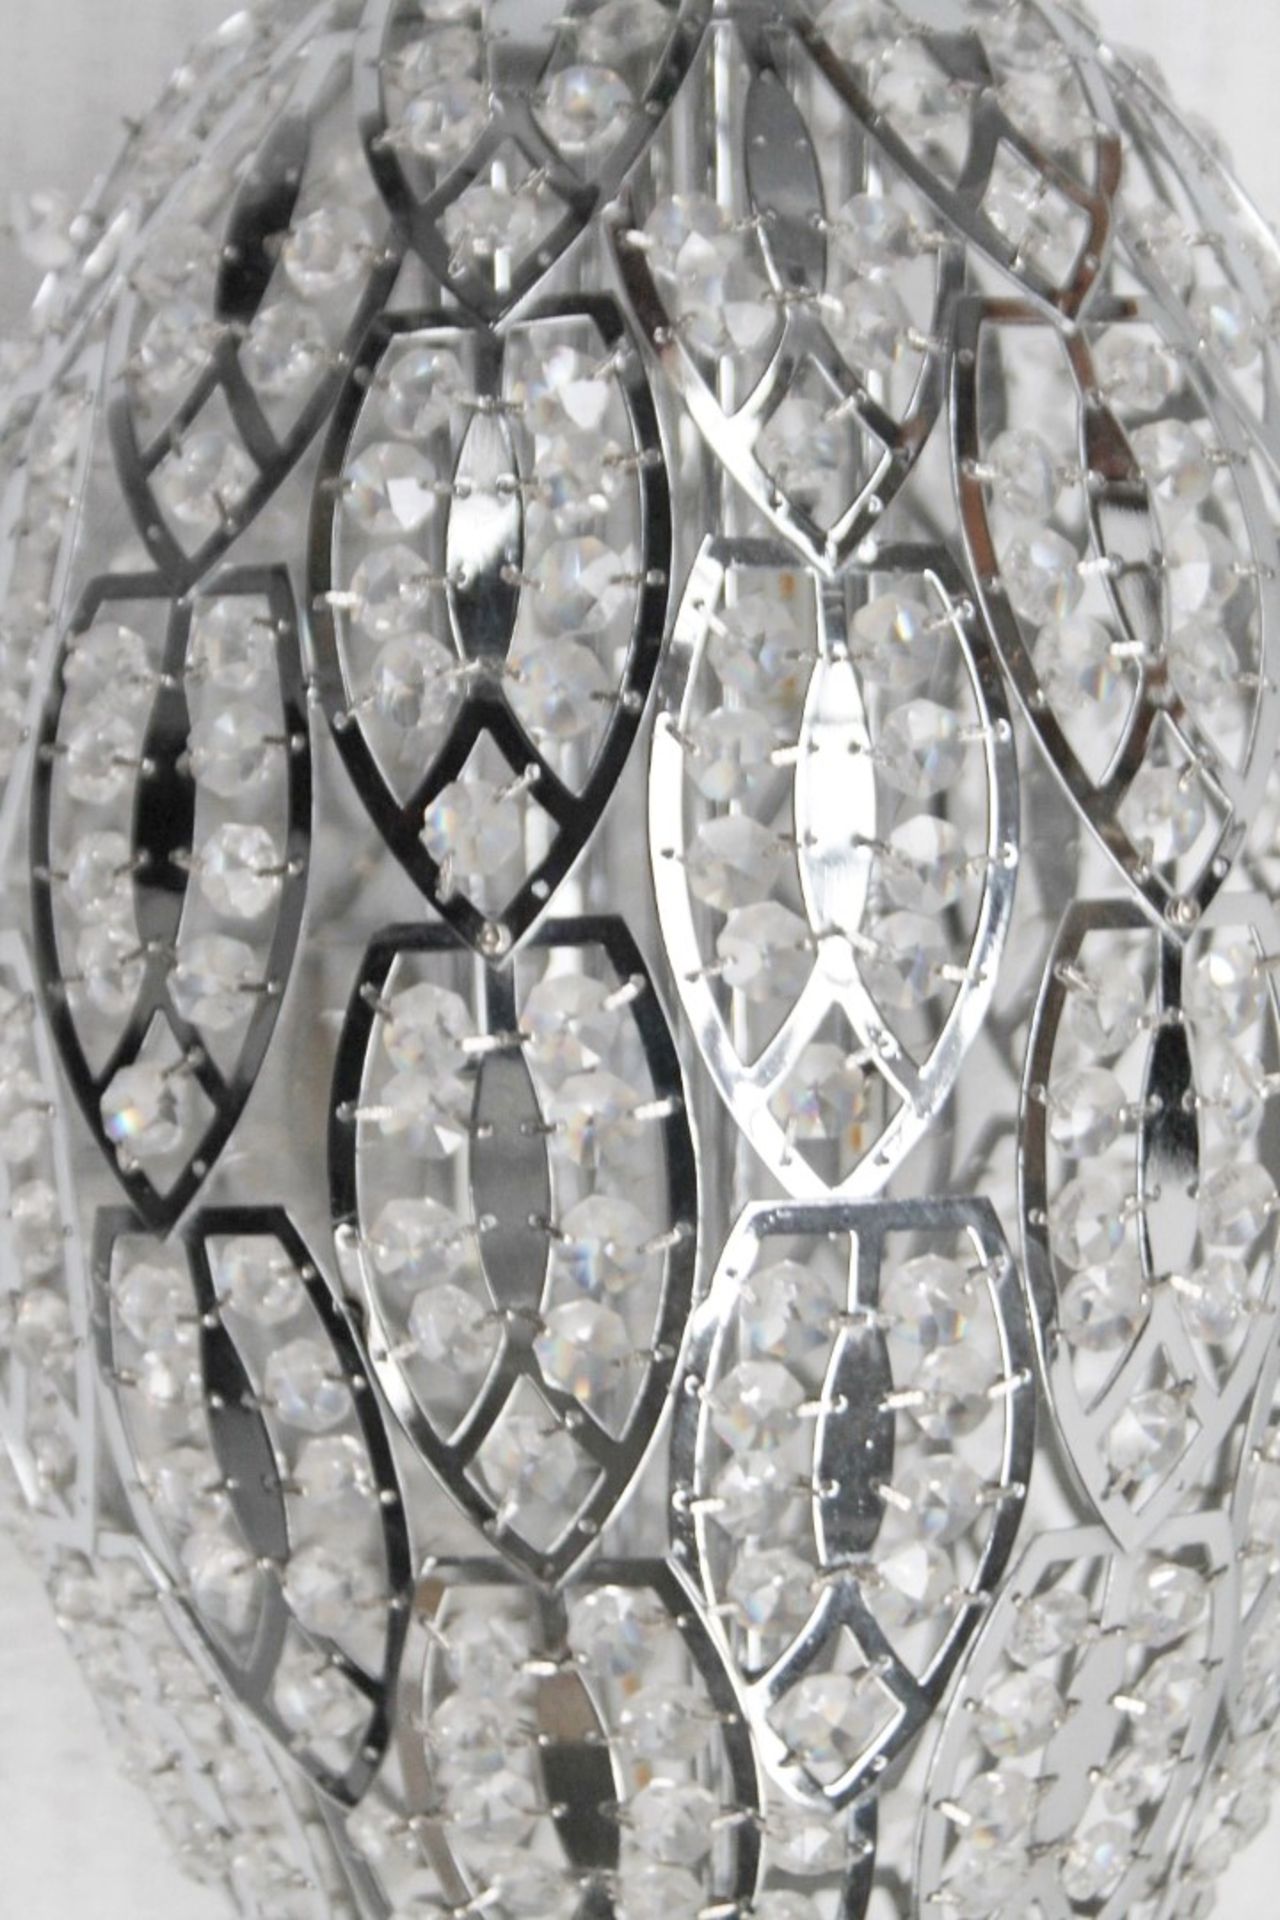 1 x High-end Italian LED Egg-Shaped Light Fitting Encrusted In Premium ASFOUR Crystal - RRP £4,000 - Image 3 of 9